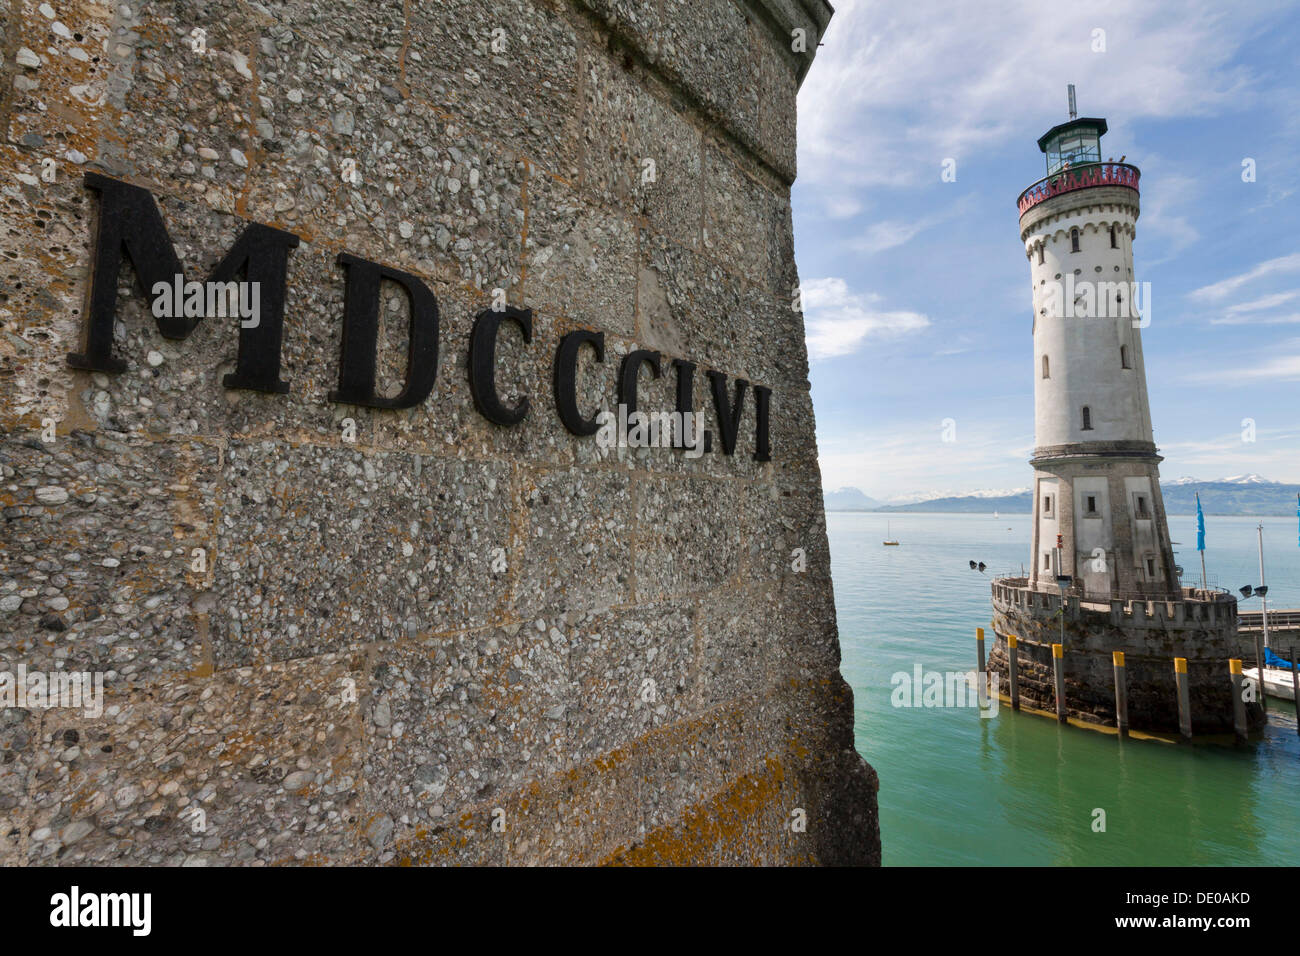 MDCCCLVI, 1856, Roman numerals on the base of the Bavarian lion overlooking the lighthouse at the harbor entrance of Lindau on Stock Photo